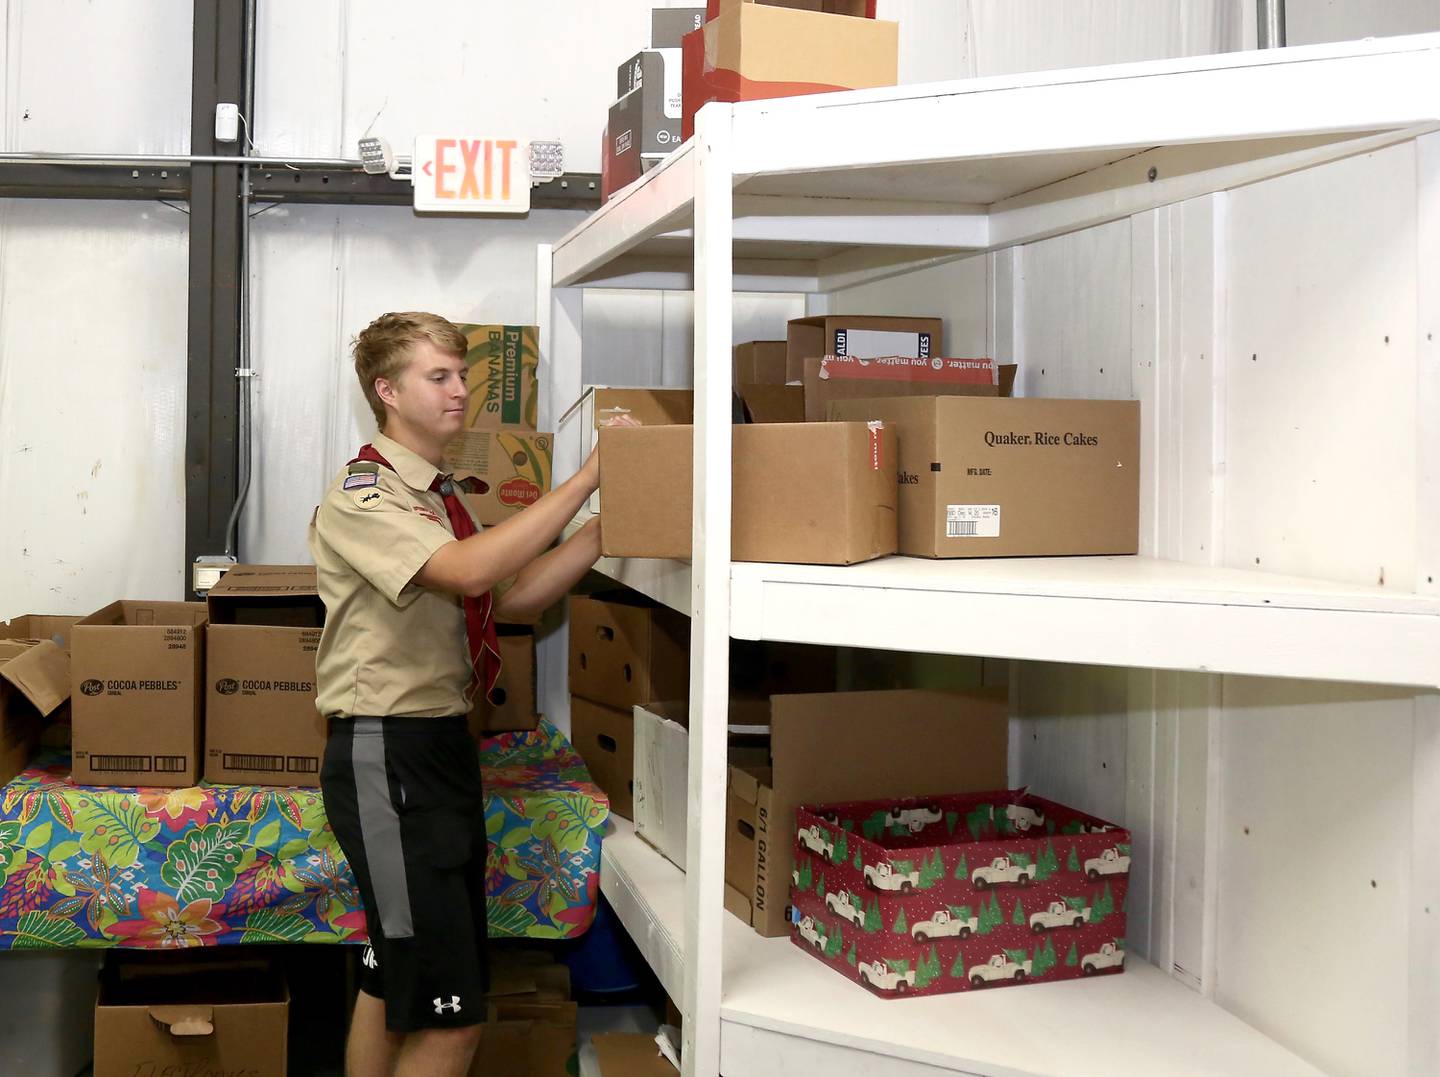 Billy Eby arranges boxes on shelves he built as his Eagle Scout Project at Between Friends Food Pantry of Sugar Grove on Wednesday, June 8, 2022.